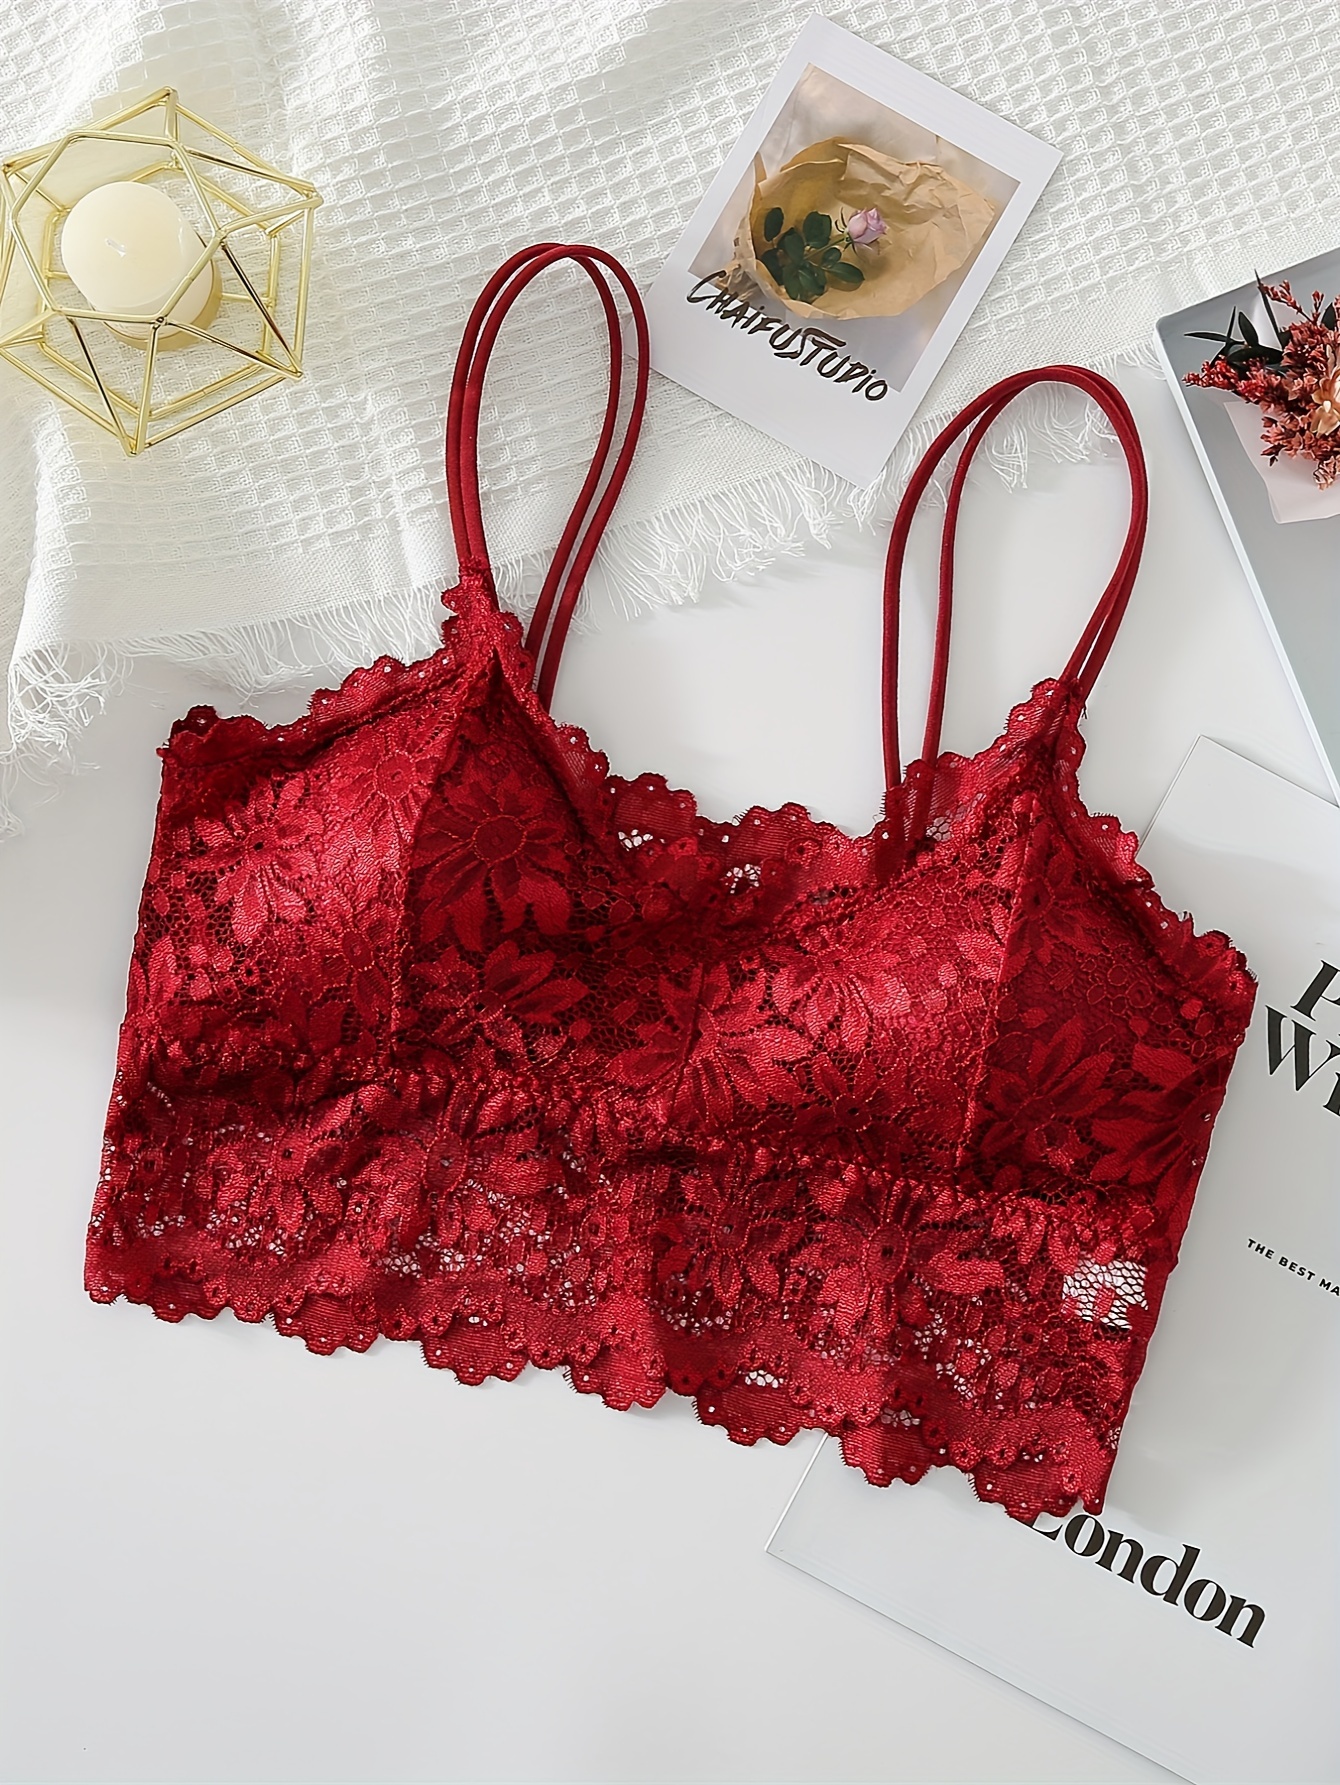 Lace Bralettes for Women Sexy Wireless Cami Bra Hollow Out Lace